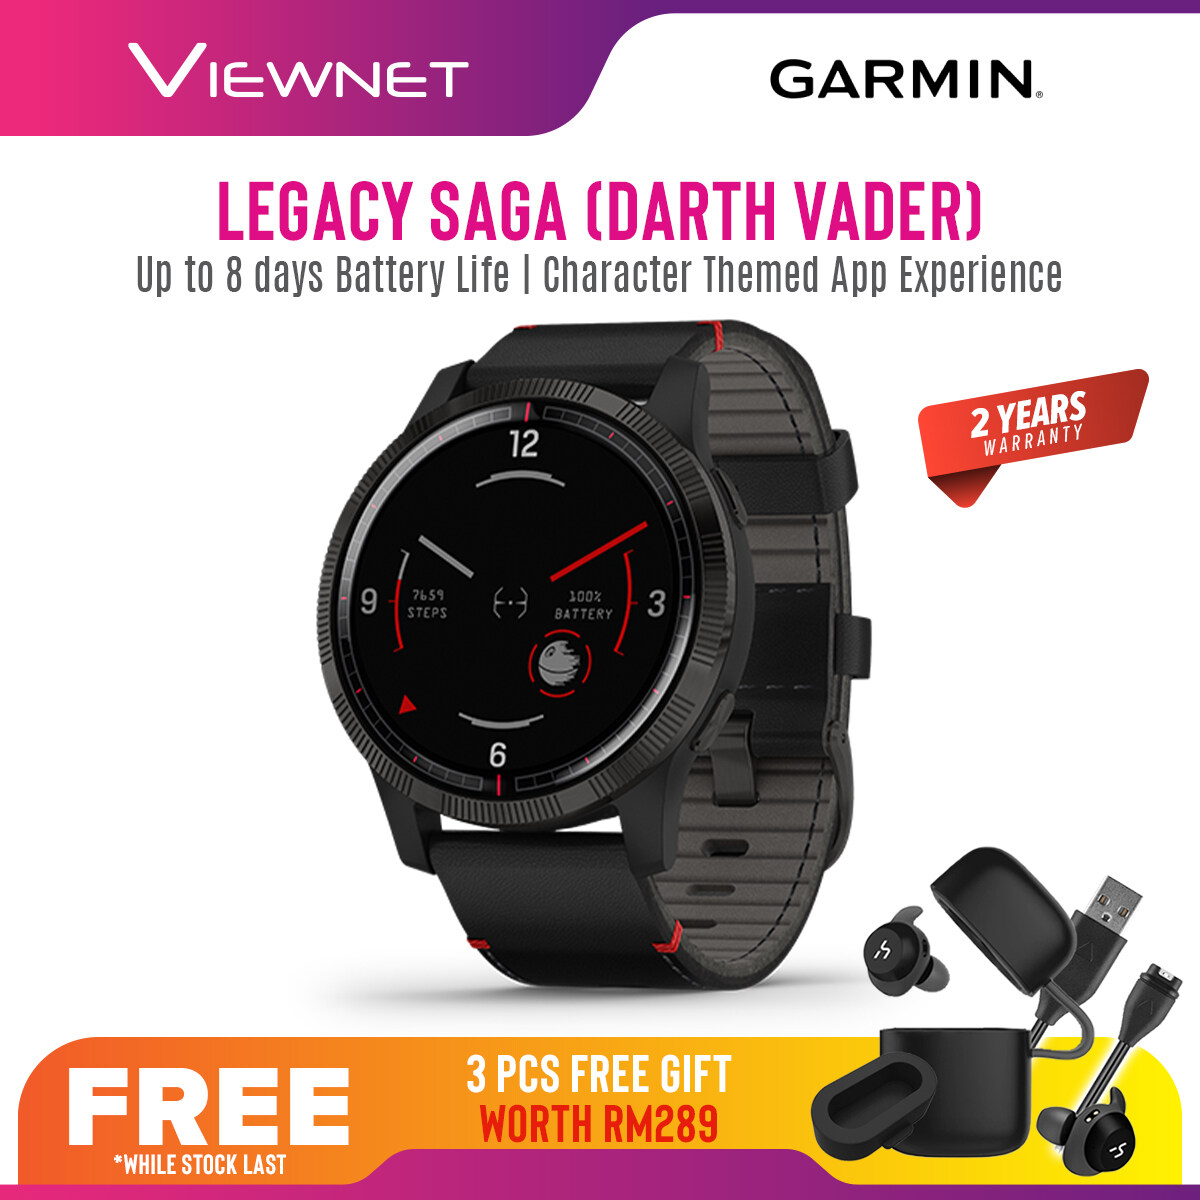 (Special Edition) Garmin Legacy Saga Series Smartwatch with Character-themed App Experience - Darth Vader / Rey